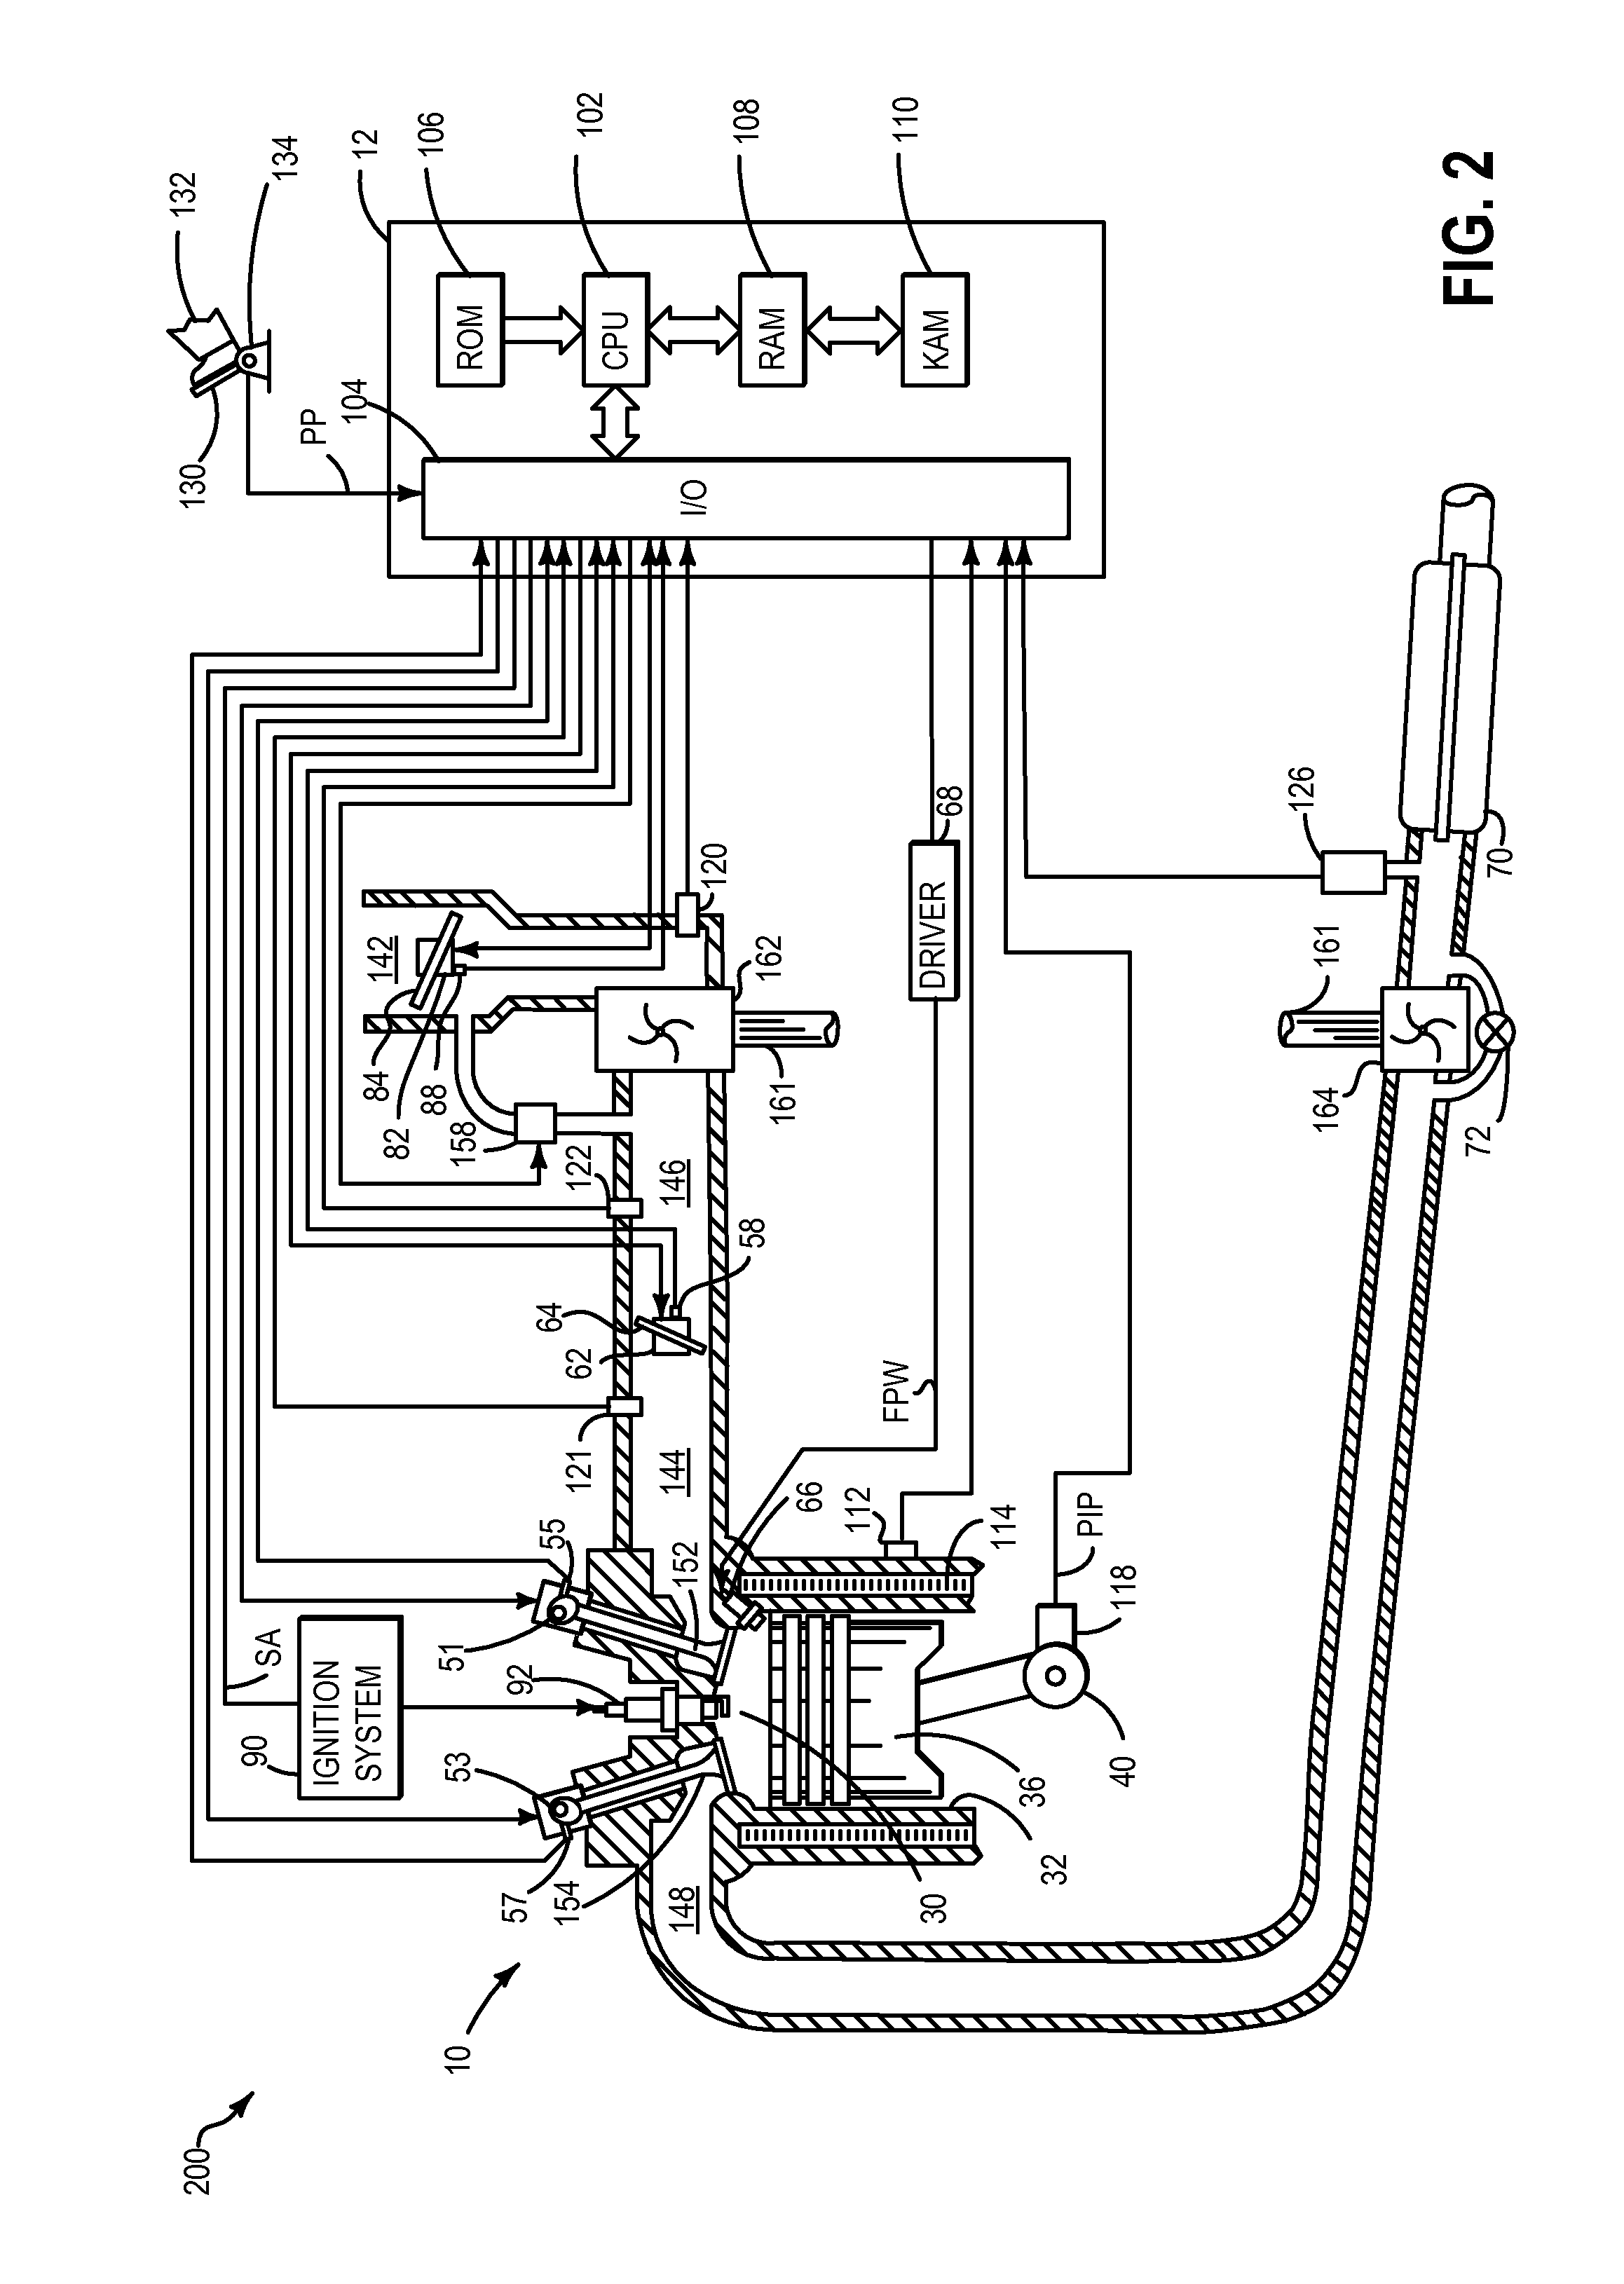 Methods and systems for torque control